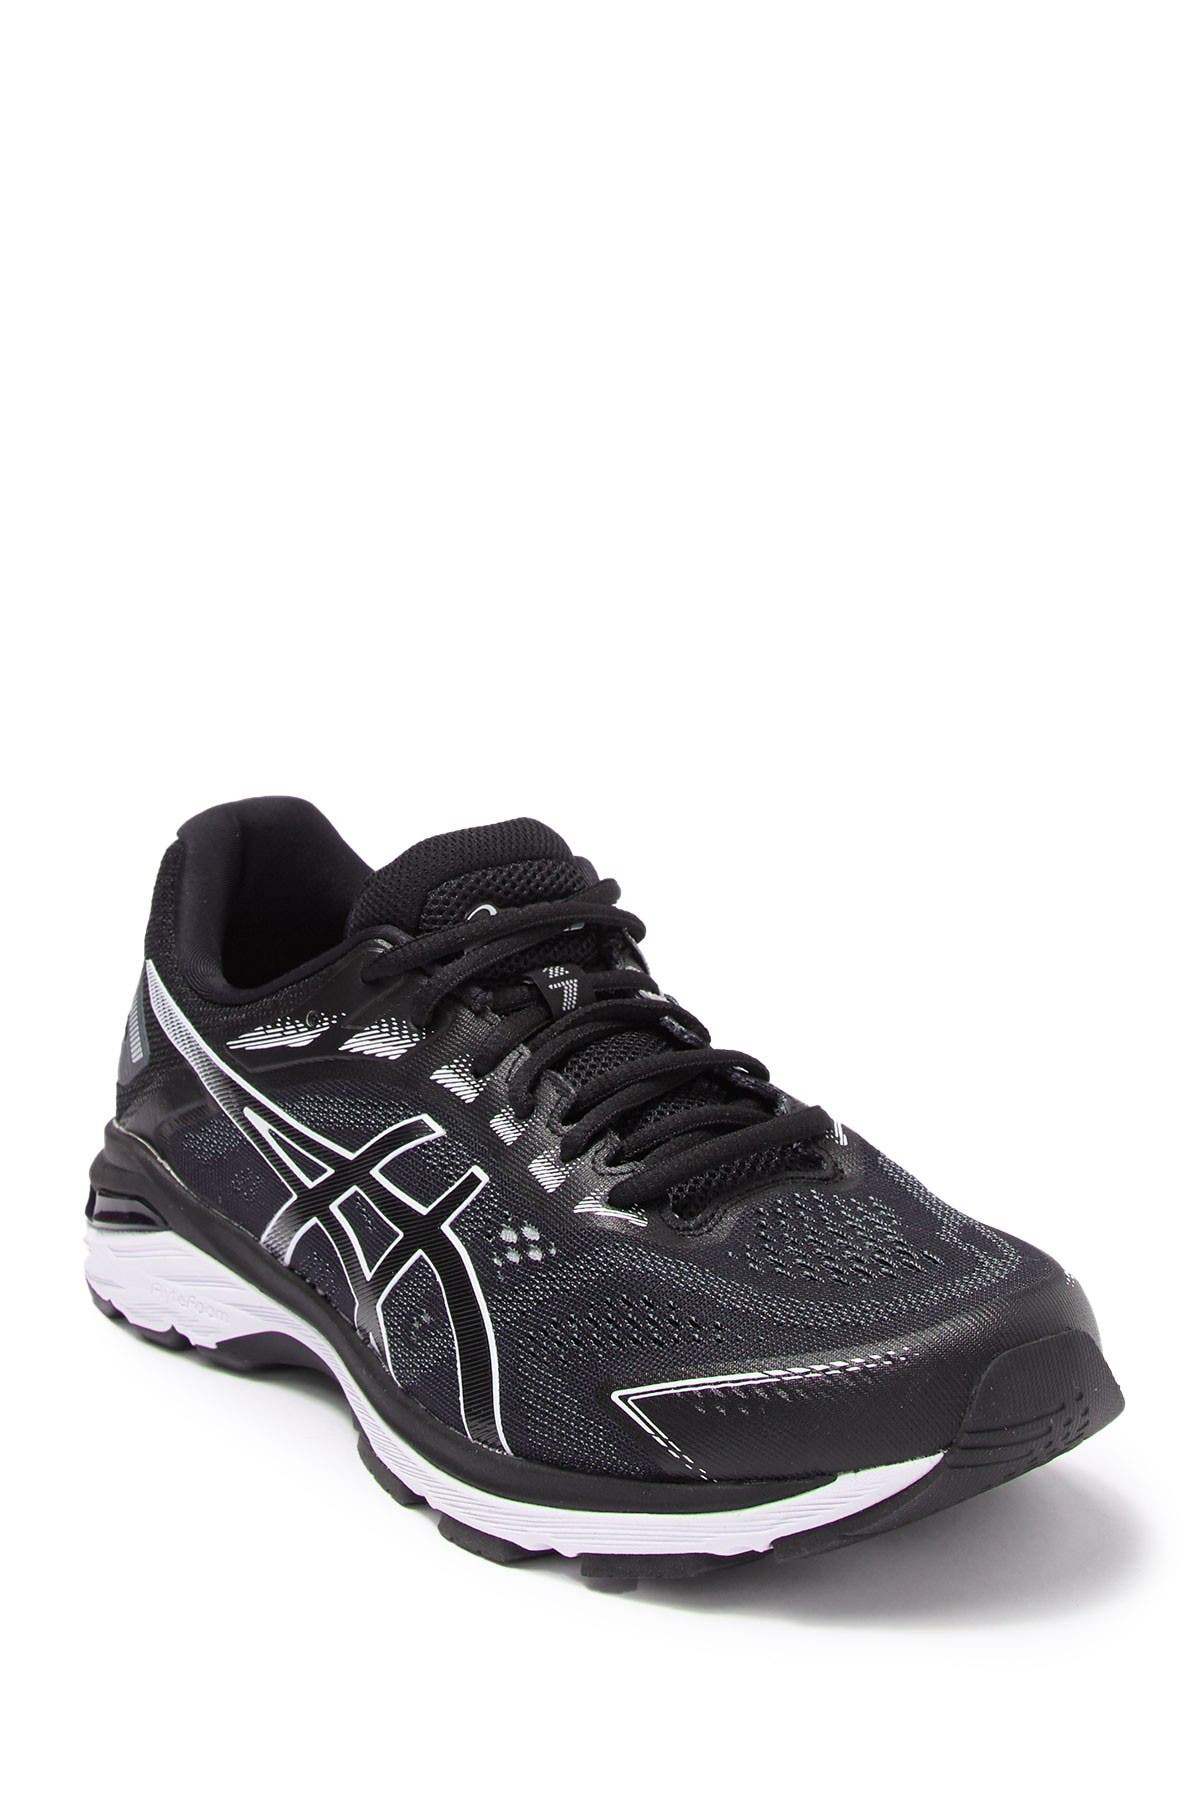 asics gt 2000 extra wide